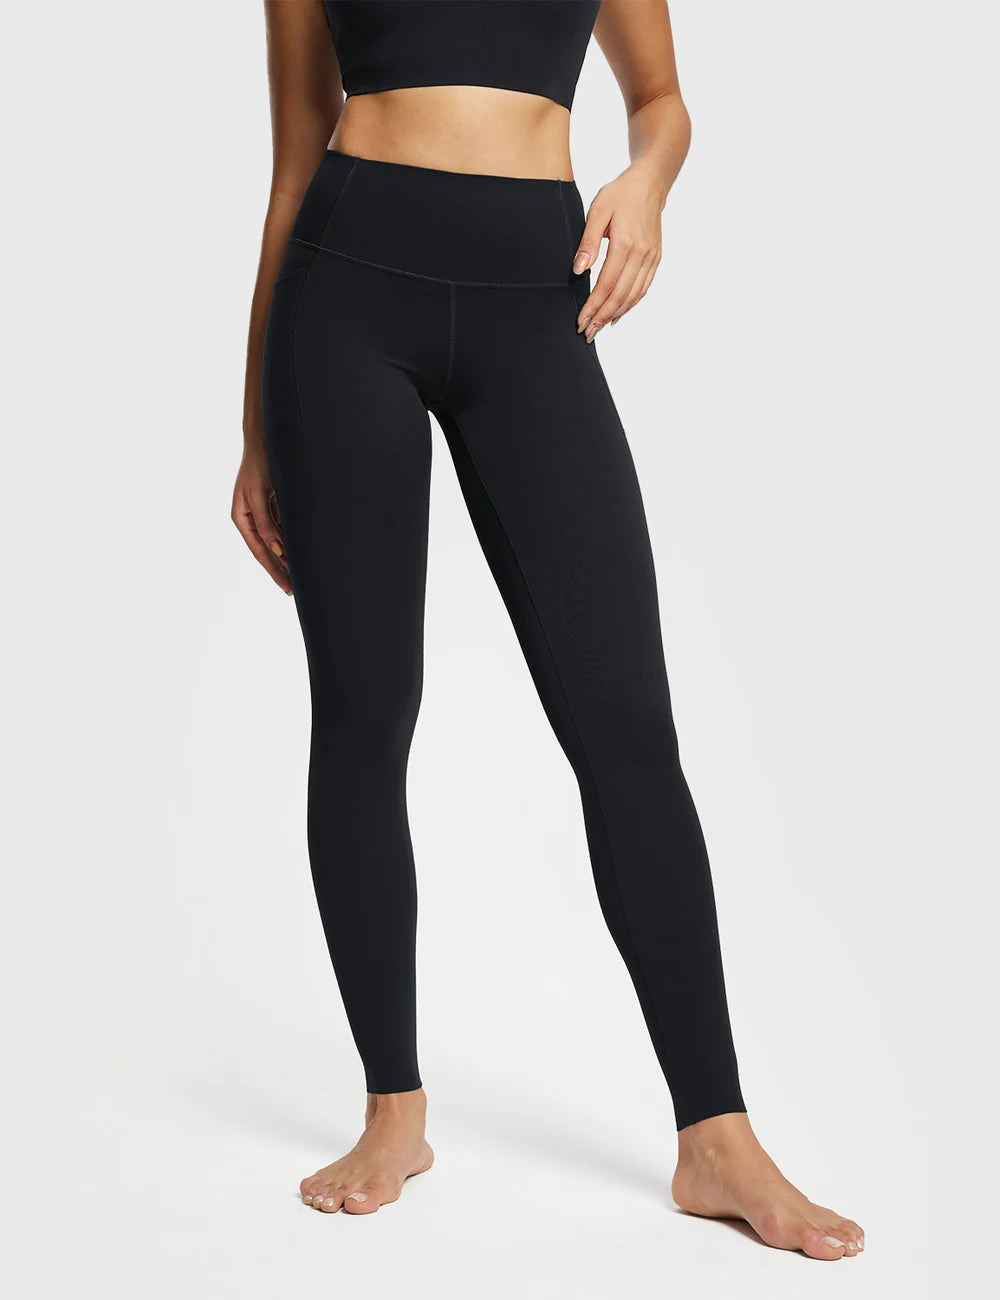 The Best Leggings for Every Body Type and Budget – Baleaf Sports